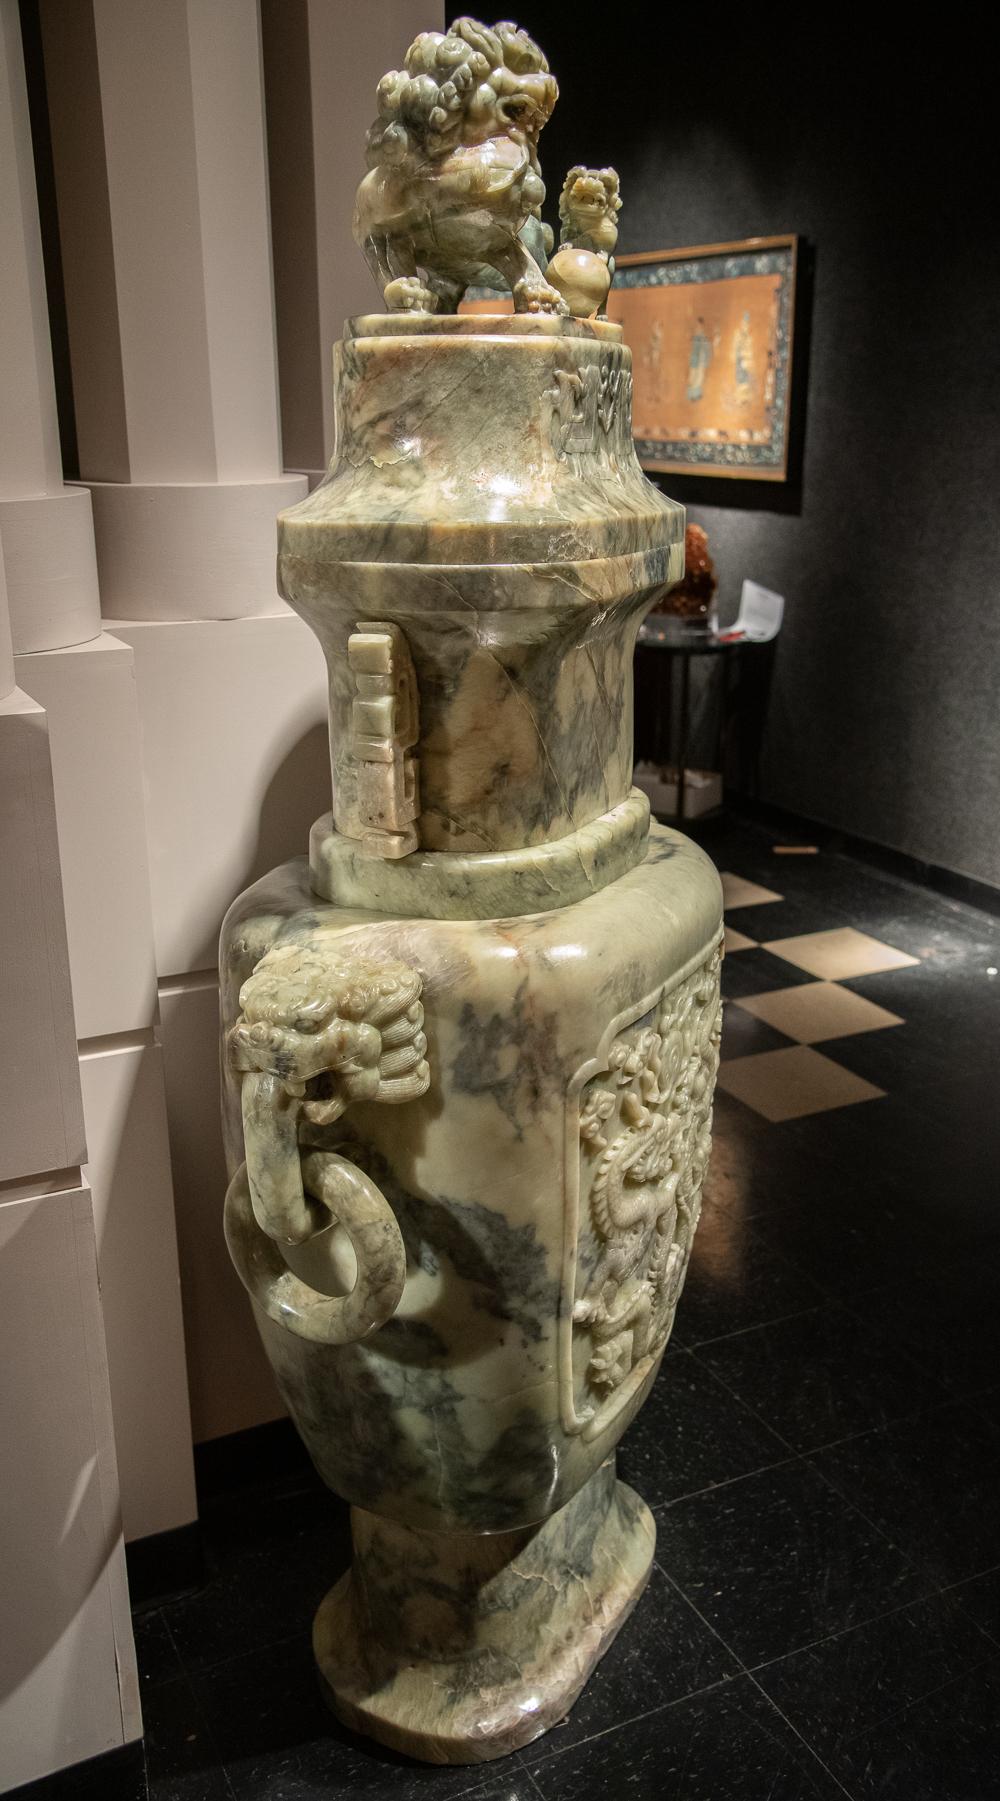 Serpentine Exceptional Single Monumental Covered Urn of Archaic Fung Lei Form